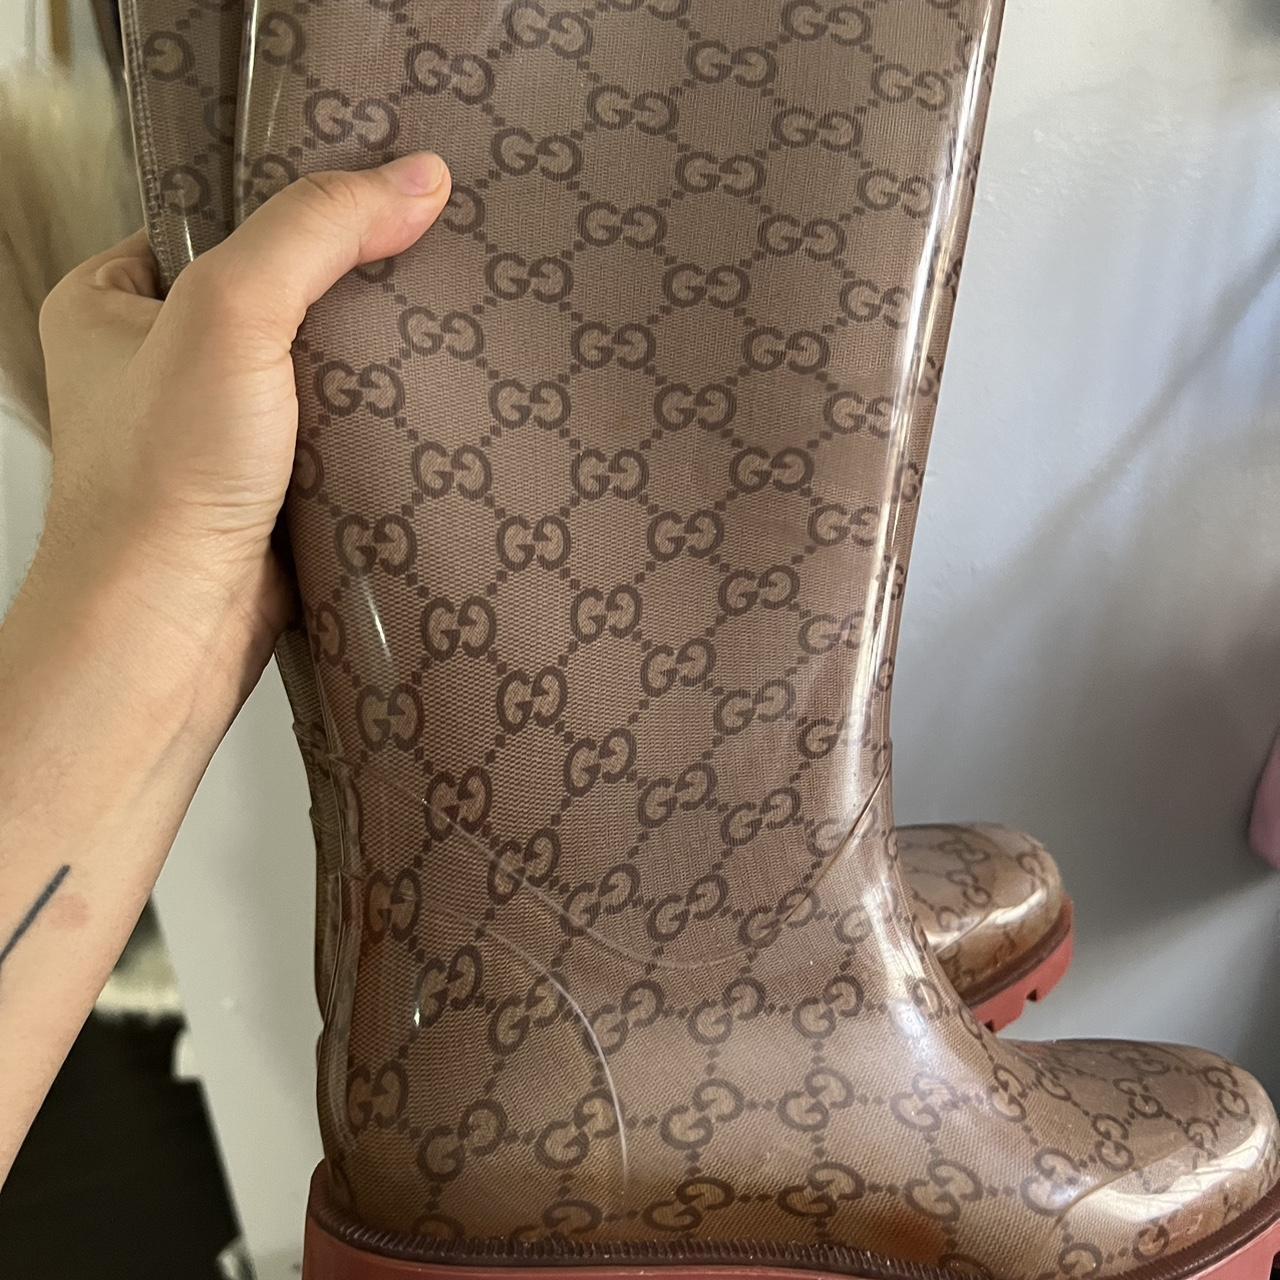 Gucci Rainboots Good conditions, some flaws see - Depop